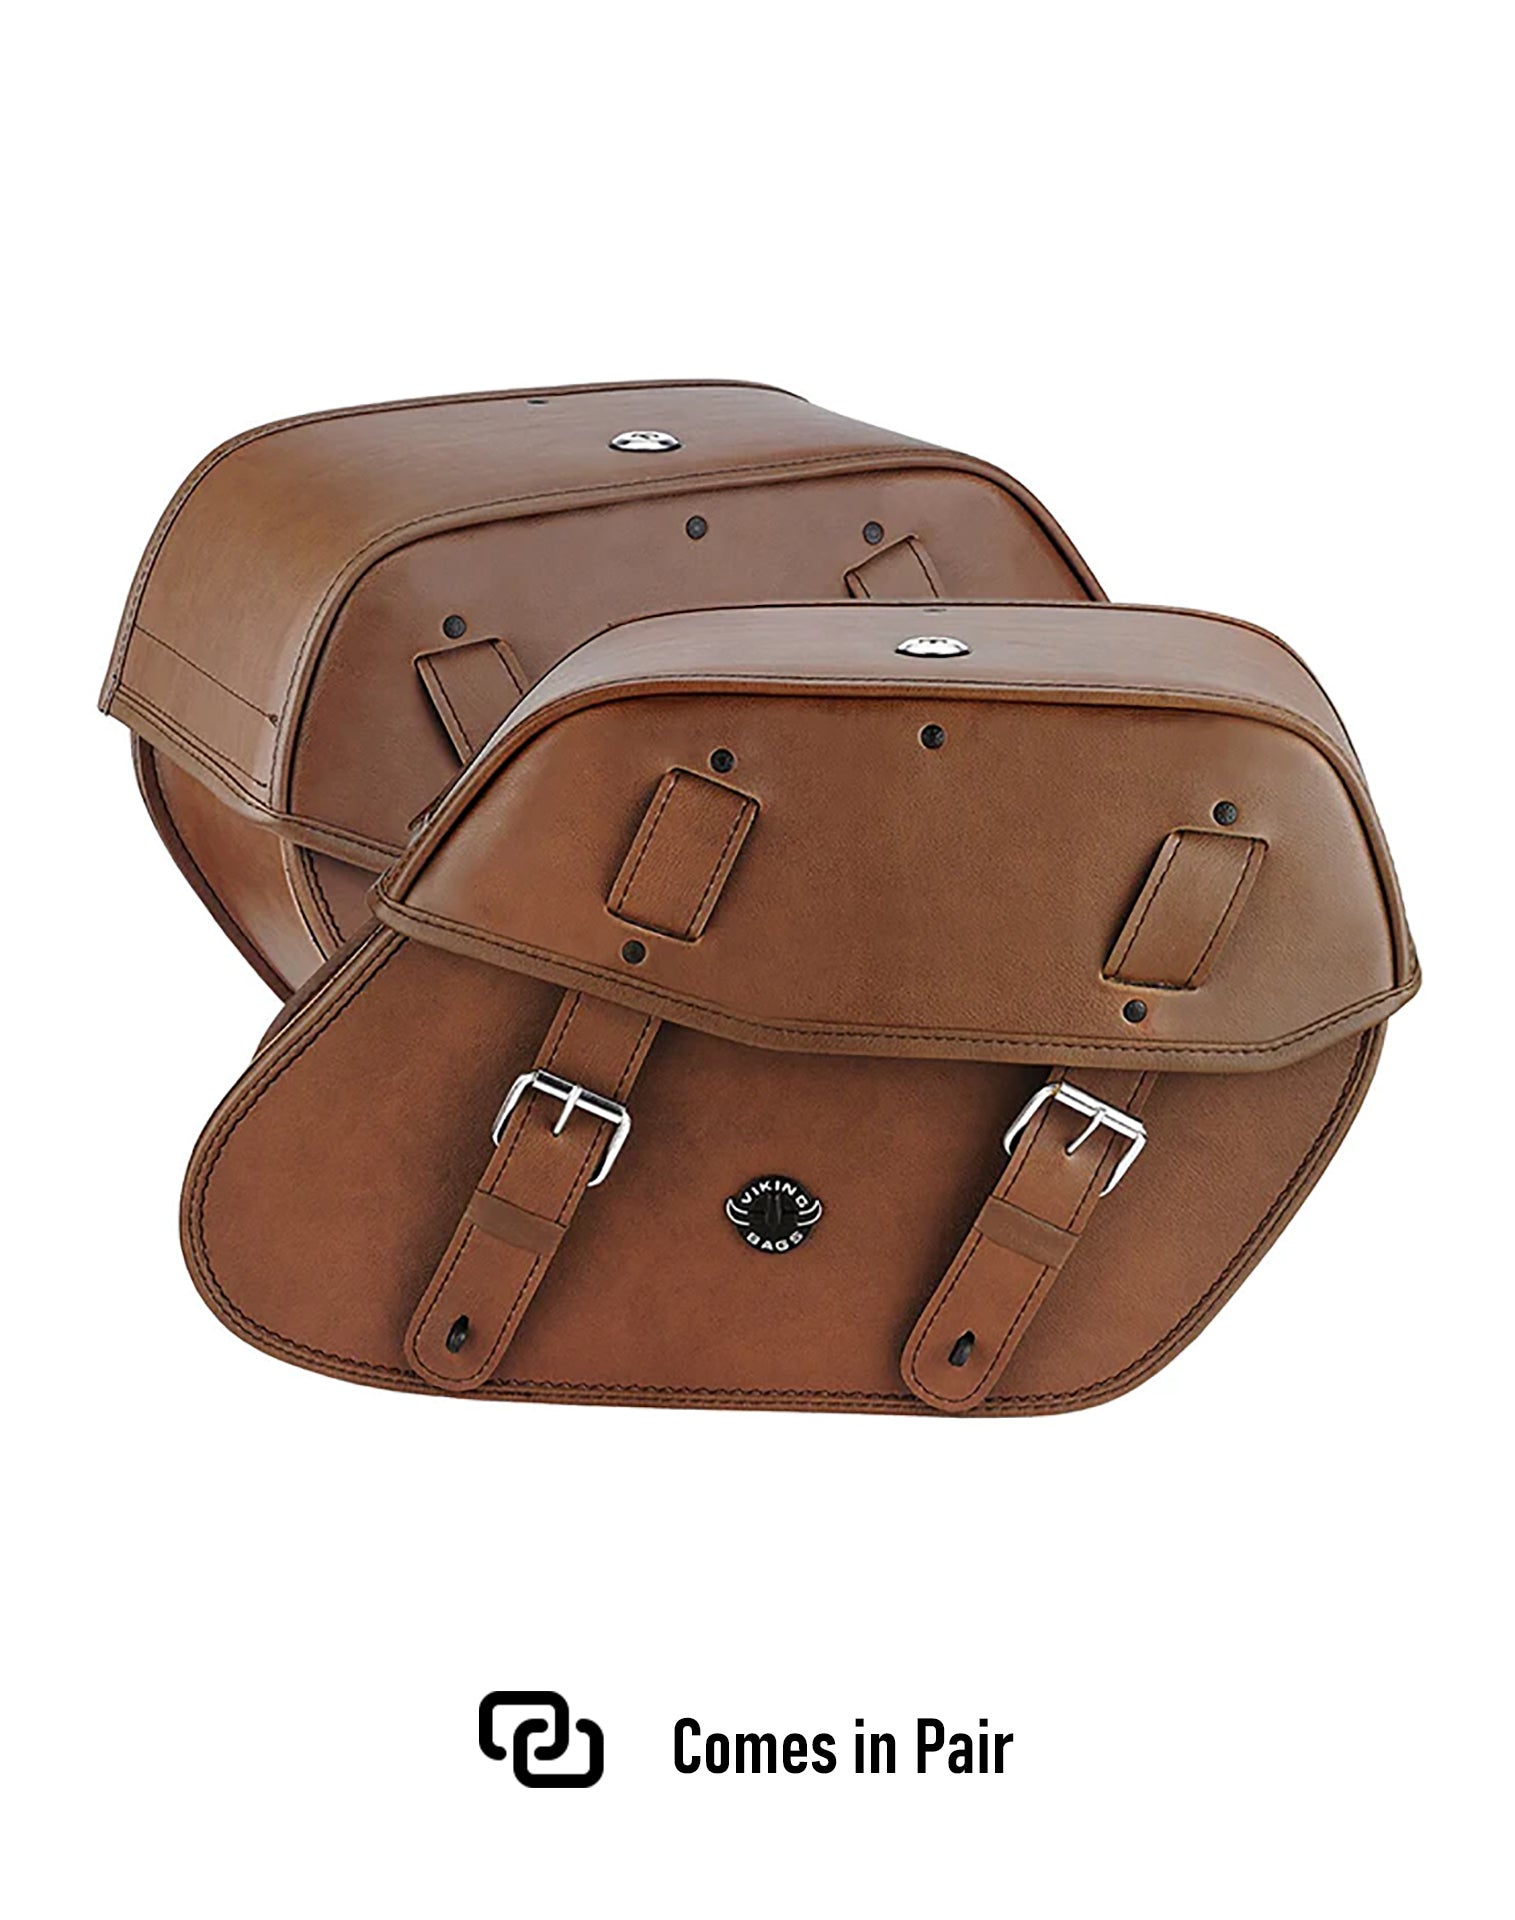 Viking Odin Brown Large Leather Motorcycle Saddlebags For Harley Softail Custom Fxstc Weather Resistant Bags Comes in Pair